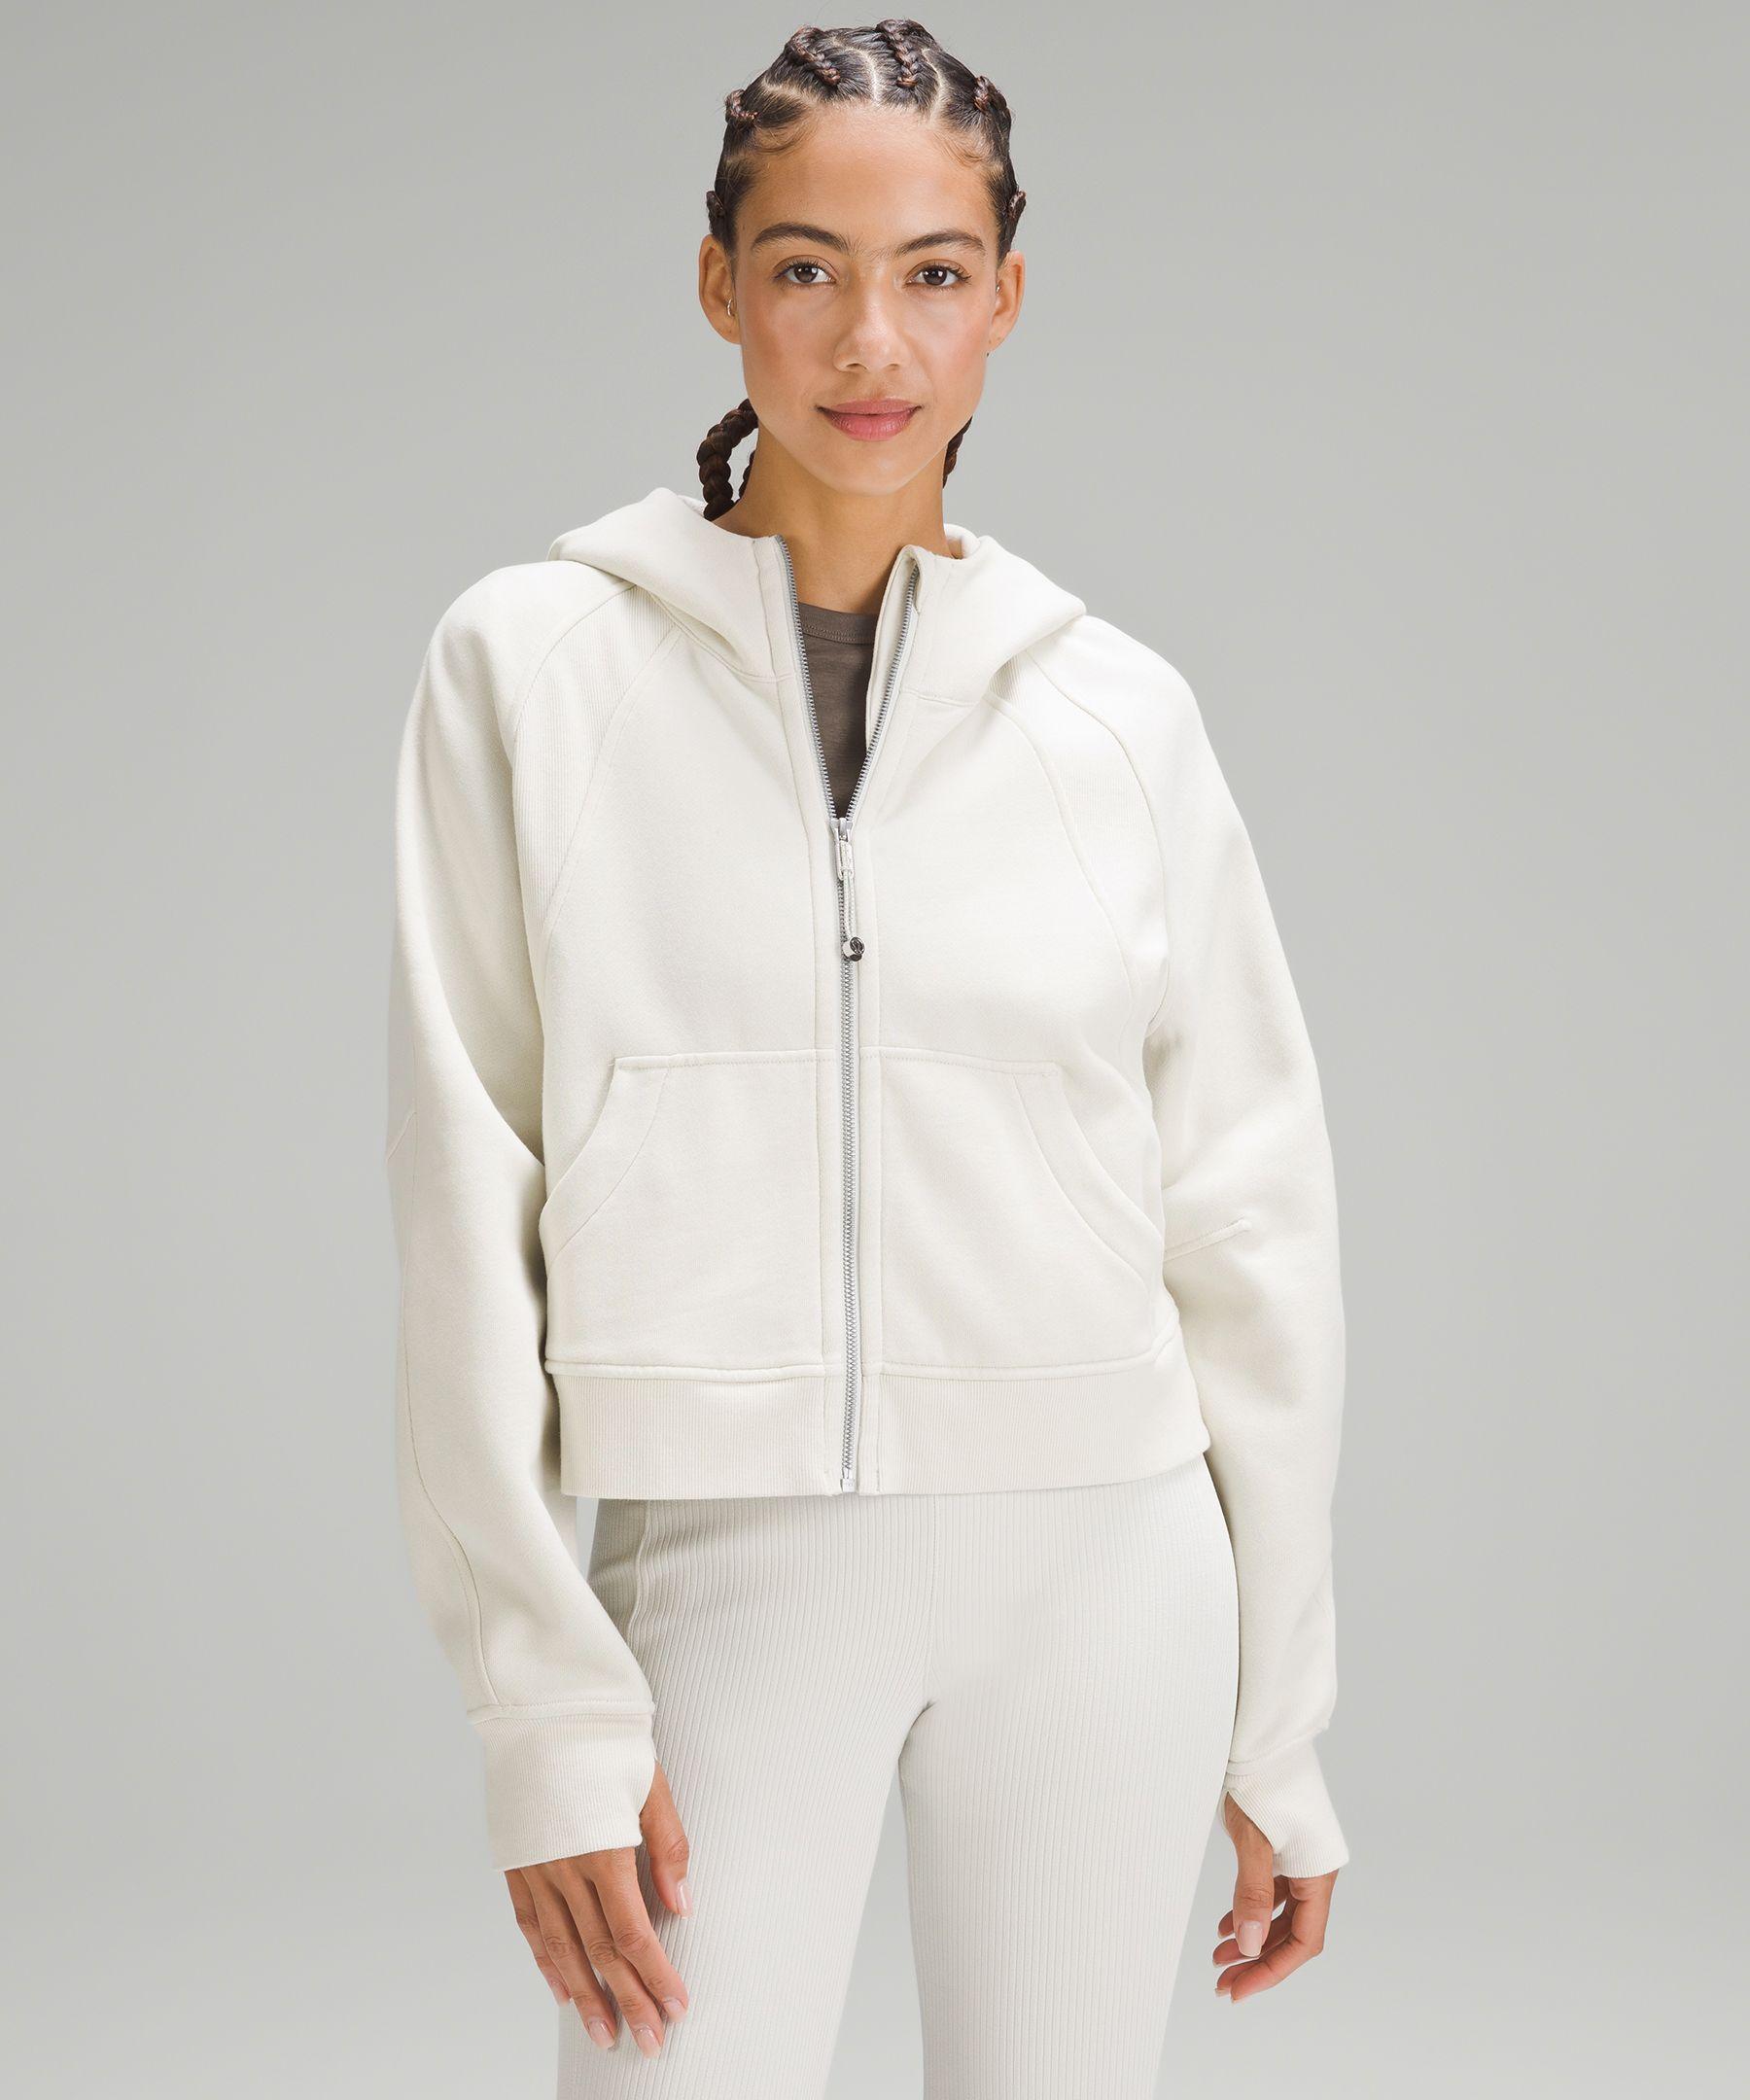 lululemon athletica Scuba Oversized Full-zip Hoodie - Color White - Size  M/l in Natural